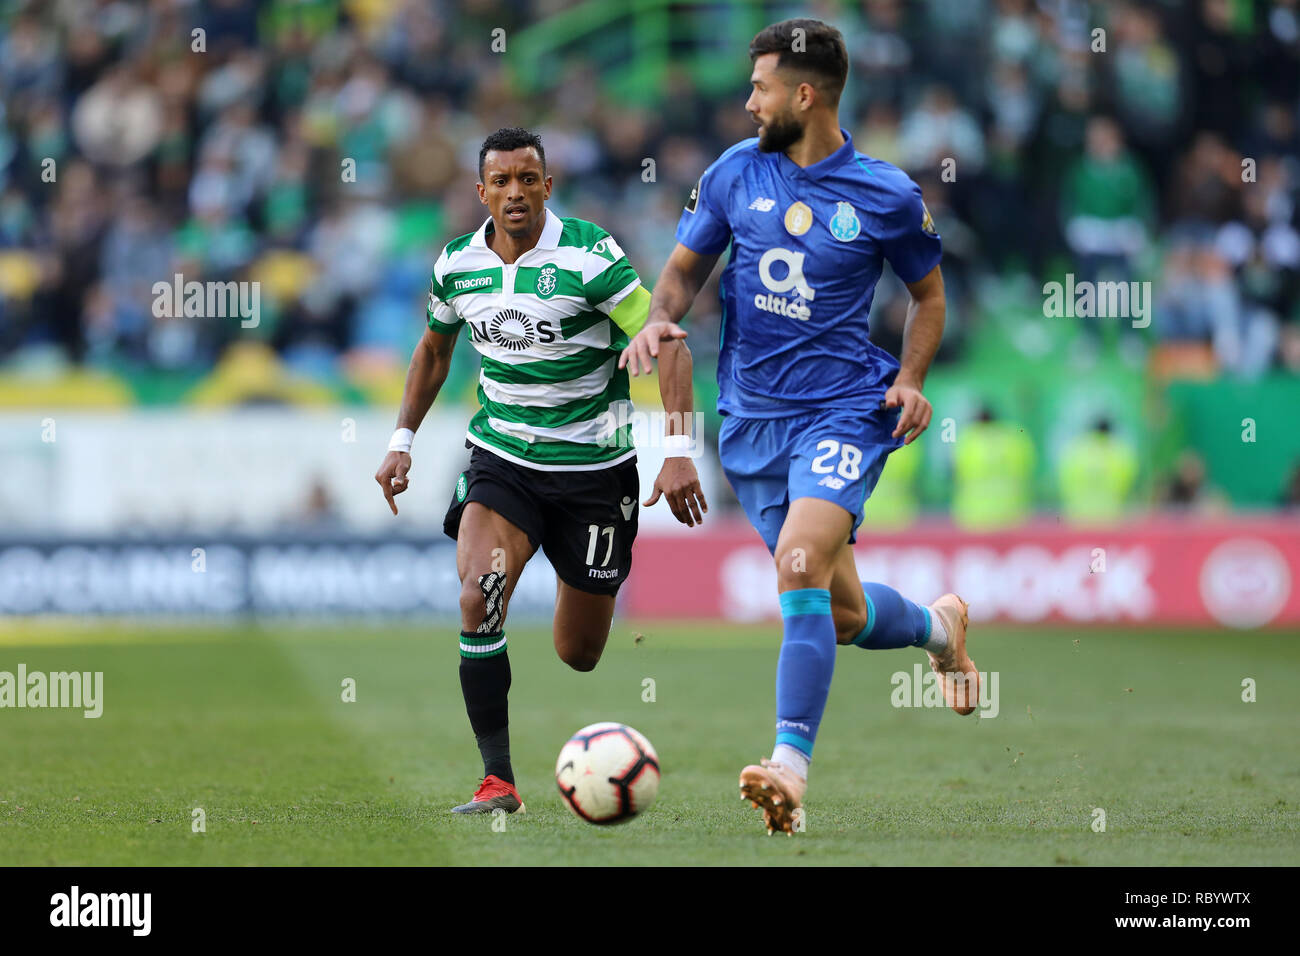 Nani of Sporting CP (L) and Felipe of FC Porto (R) are seen in action during the League NOS 2018/19 football match between Sporting CP vs FC Porto. (Final score: Sporting CP 0 - 0 FC Porto) Stock Photo